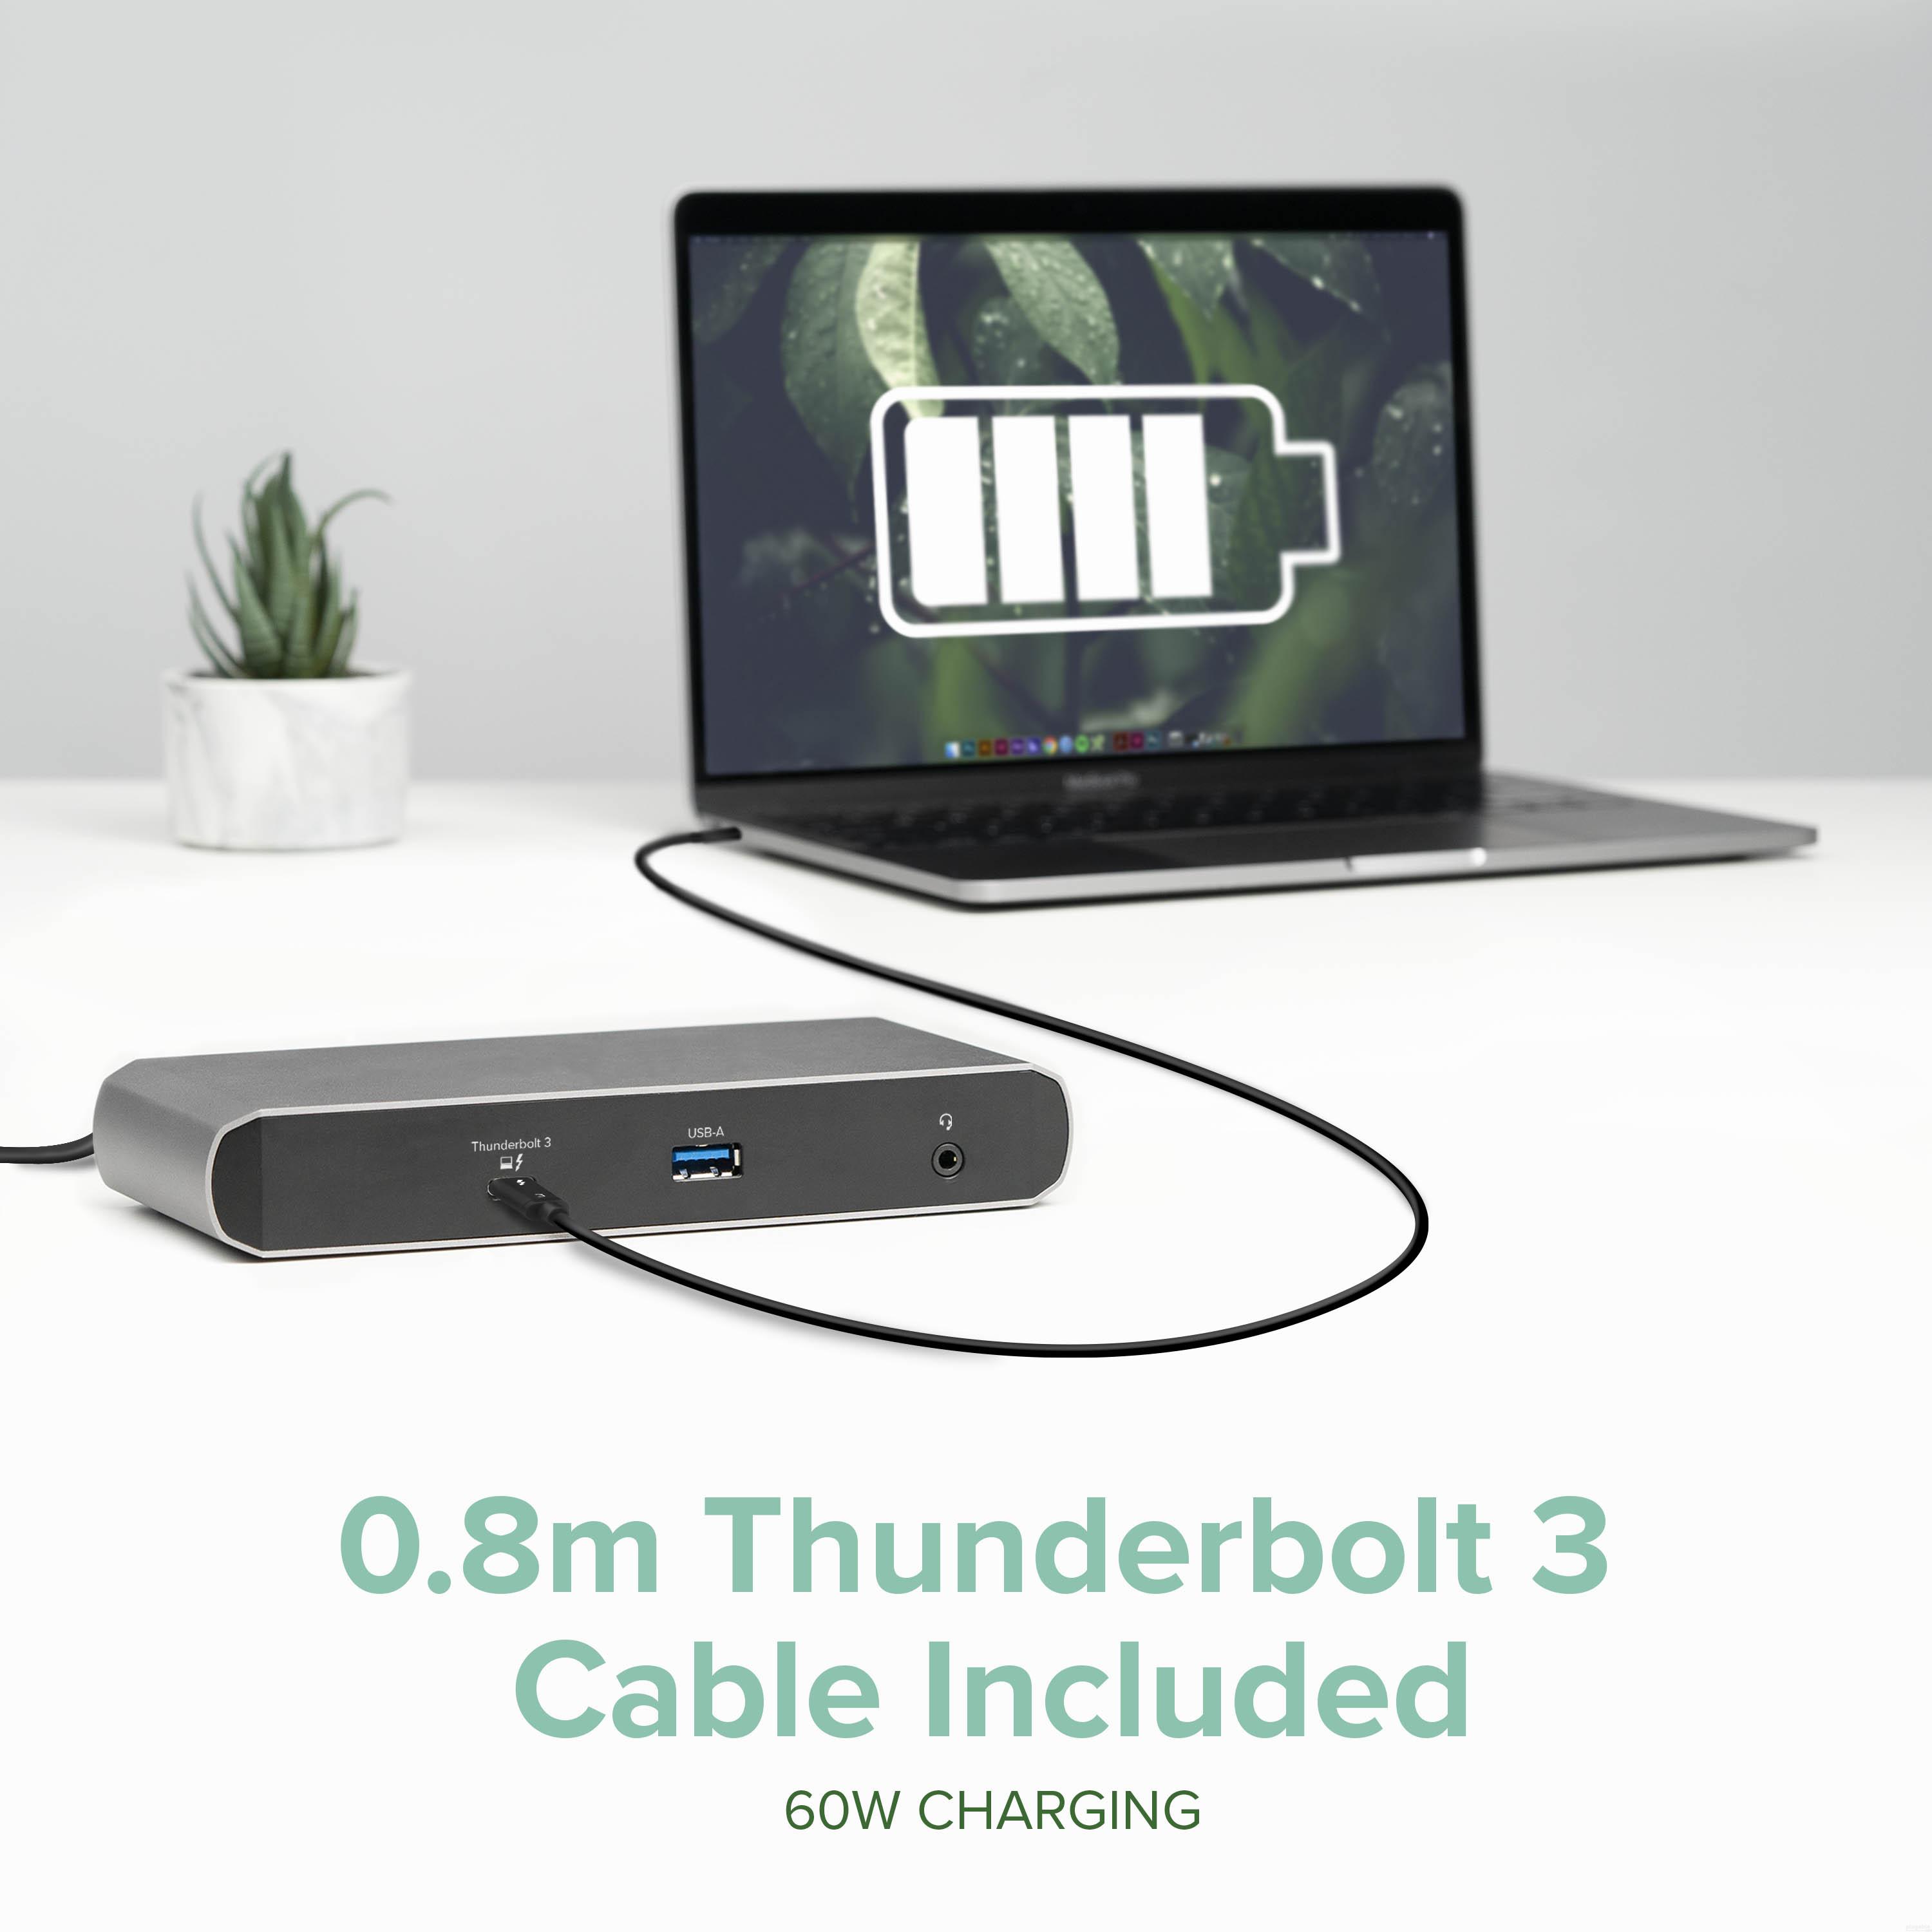 Plugable Thunderbolt 3 and USB C Dock with 60W Charging, Compatible with MacBook / MacBook Pro and Windows, Dual DisplayPort or HDMI with Included Adapter, 2x USB-C, 3x USB 3.0, Gigabit Ethernet - image 7 of 7